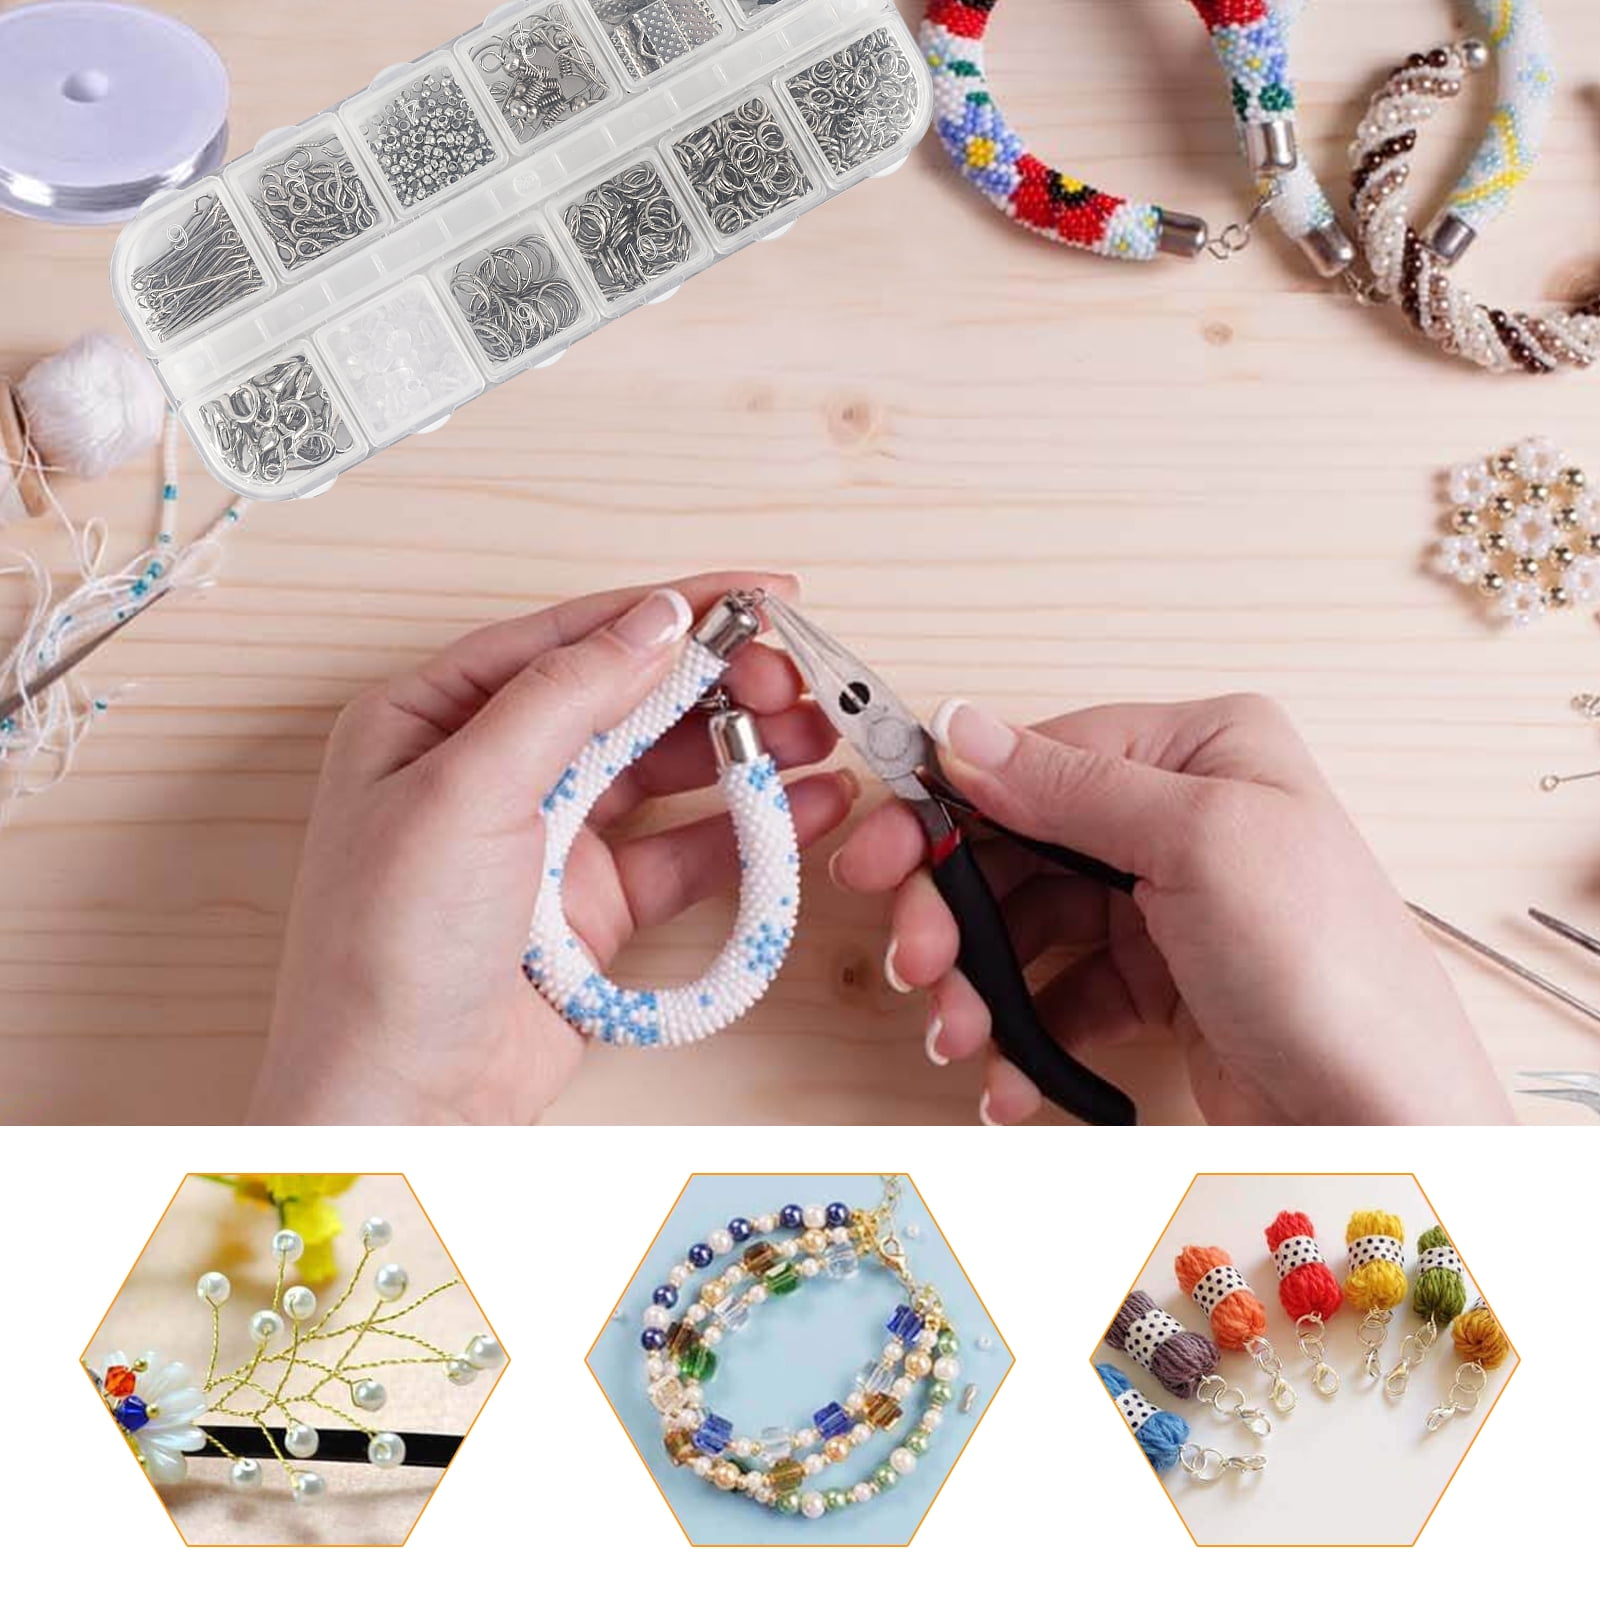 FIRSTMEET Jewelry Making Kit with Instructions, Beads, Charms, Findings,  Jewelry Pliers, Beading Wire for Necklace Bracelet Earrings Making and  Repair